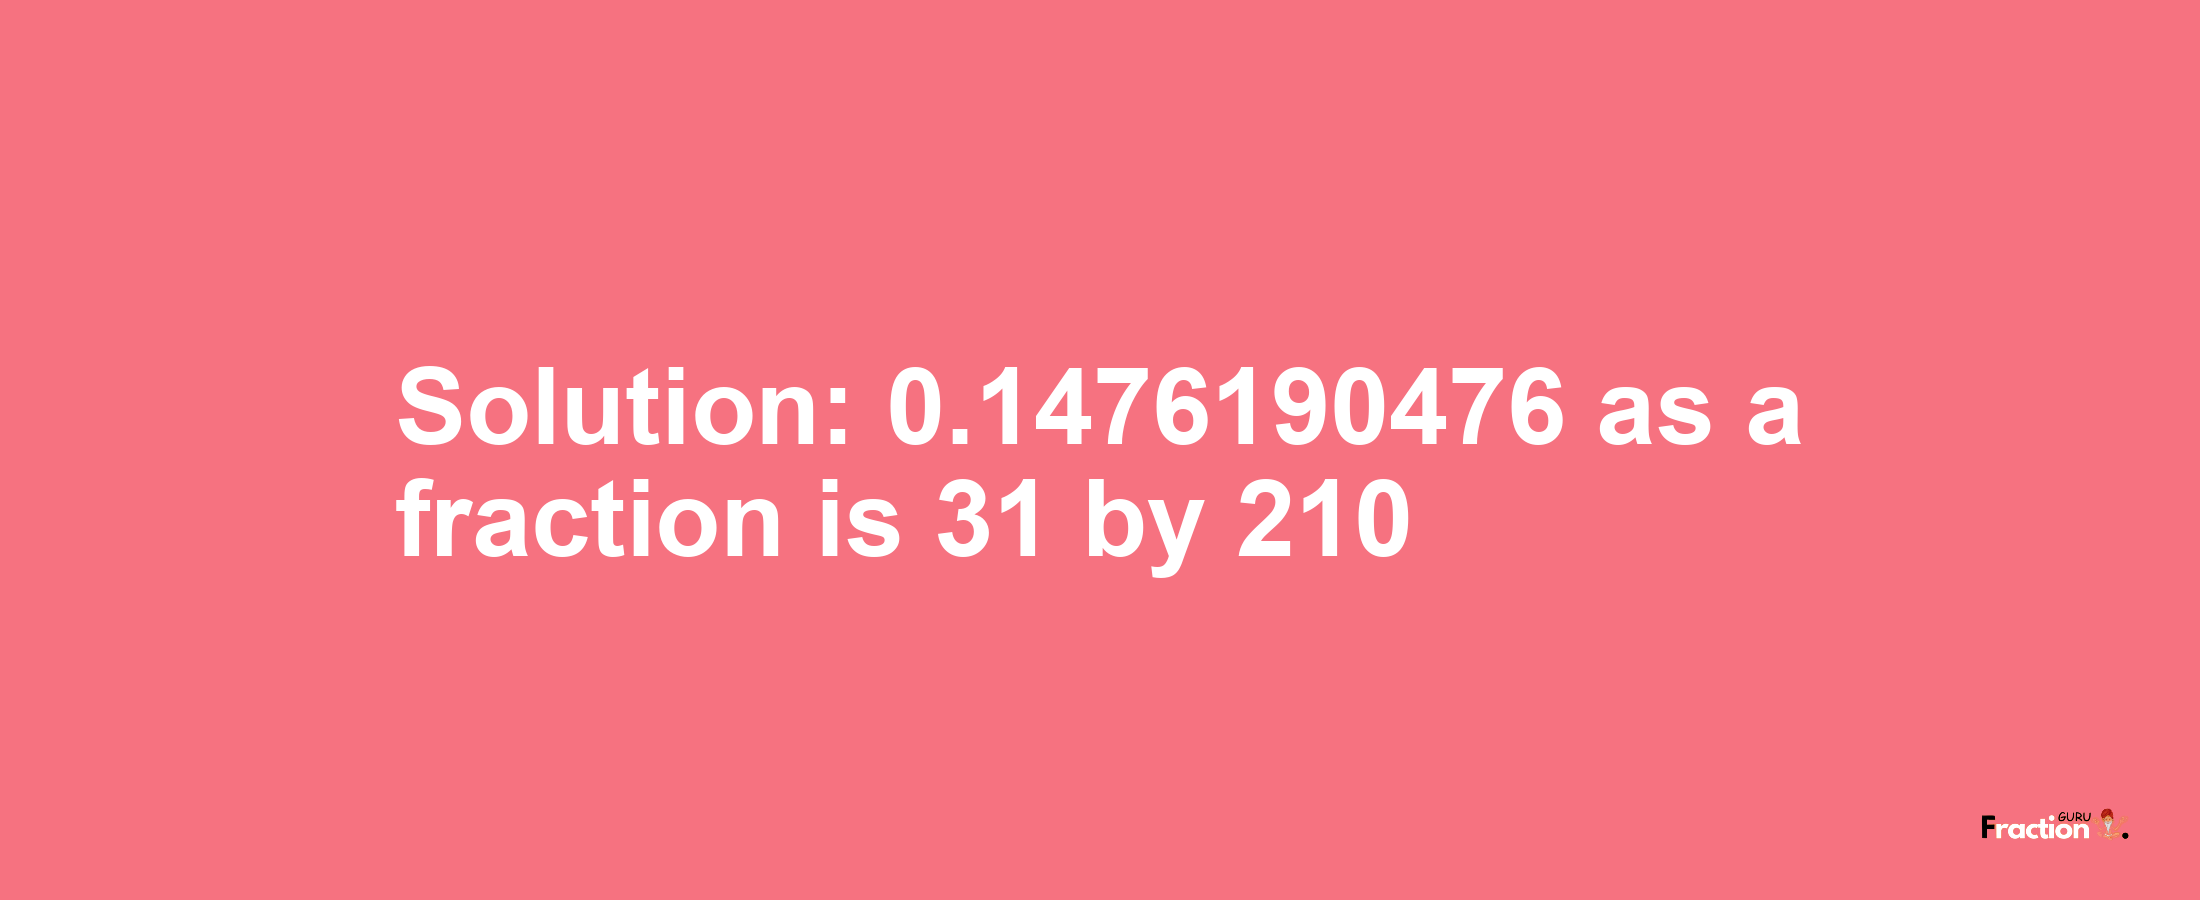 Solution:0.1476190476 as a fraction is 31/210